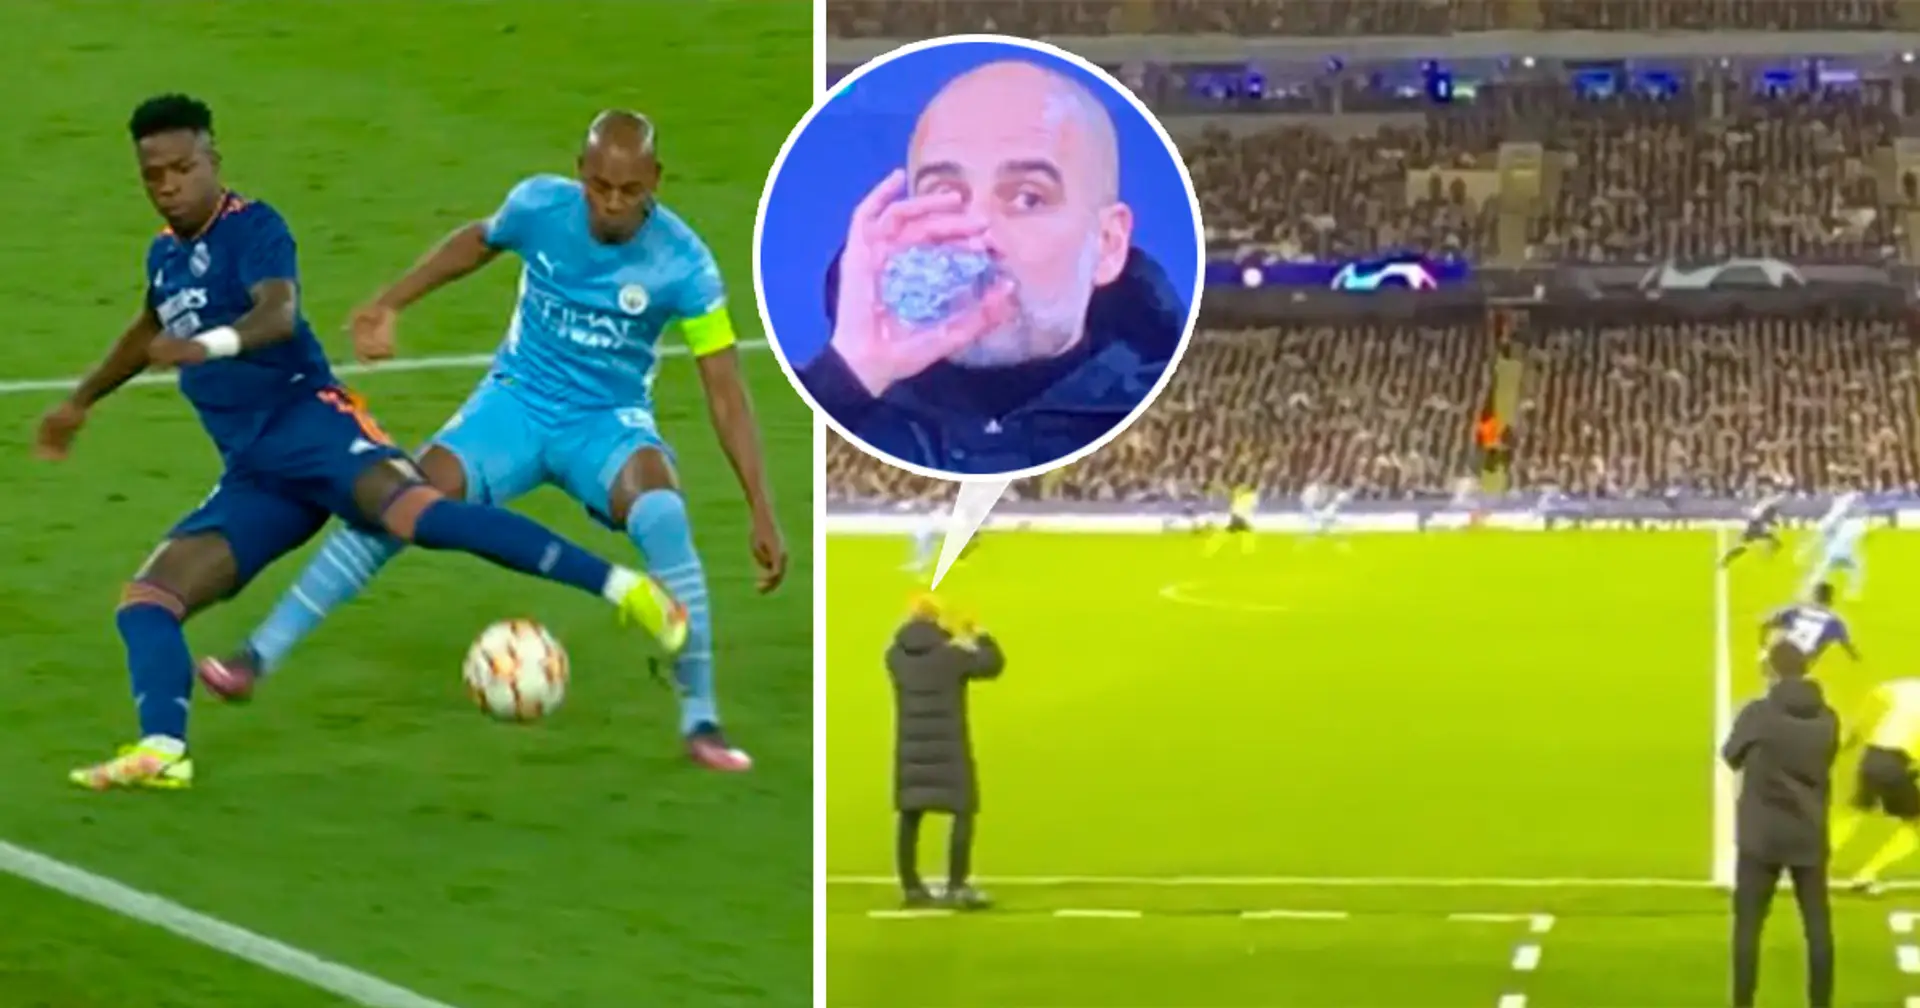 Pep Guardiola's reaction to Vinicius ending Fernandinho's career with brilliant skill caught on camera